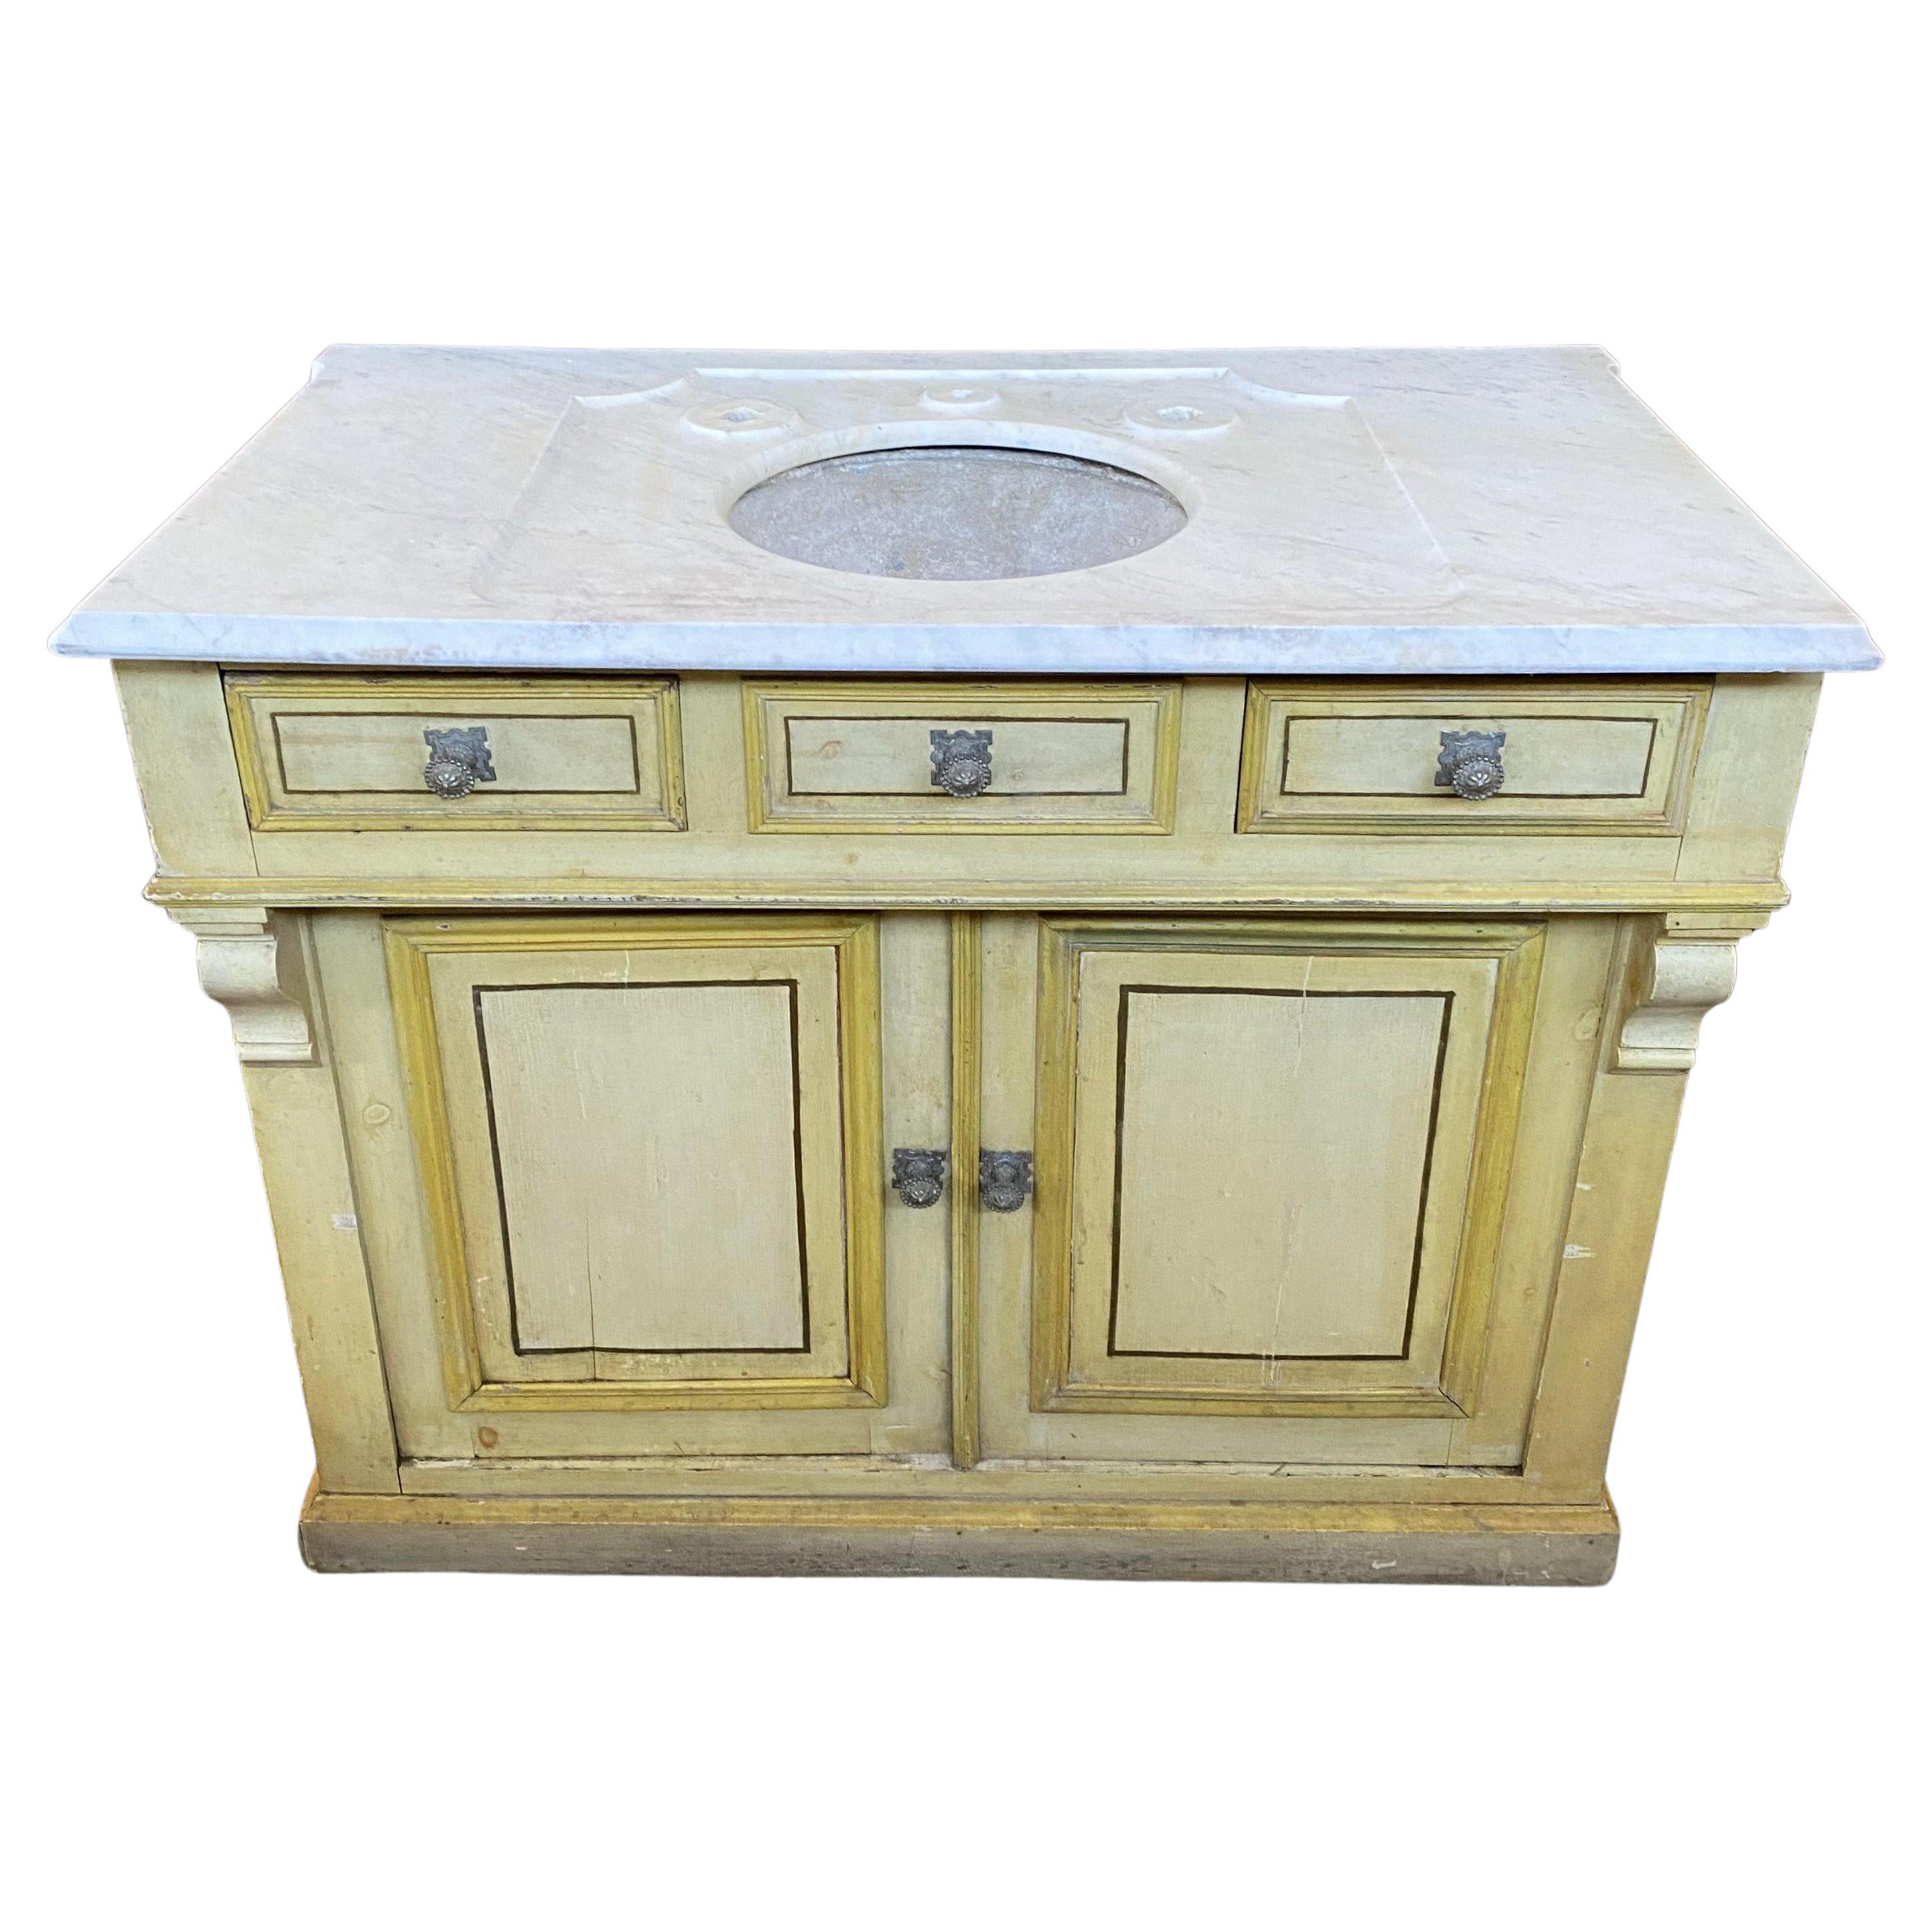 Spectacular 19th Century French Marble Countertop Sink Cabinet For Sale